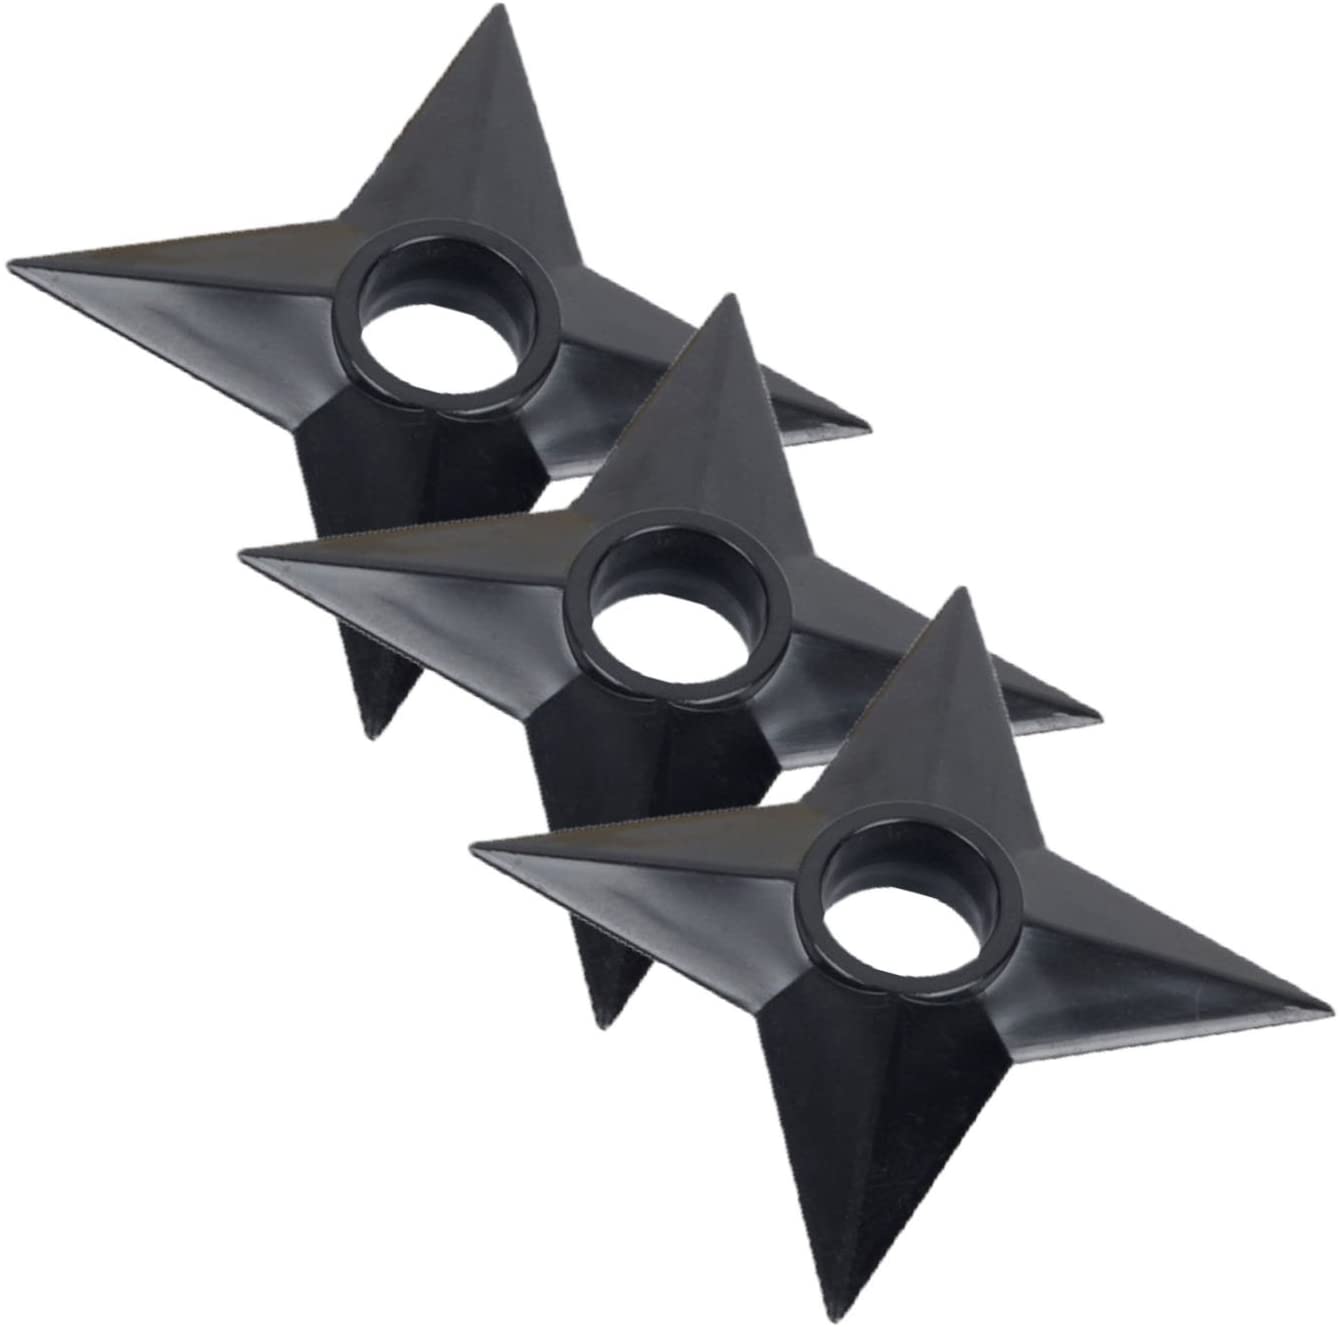 Shuriken And Other Kits - XPlayer Shop